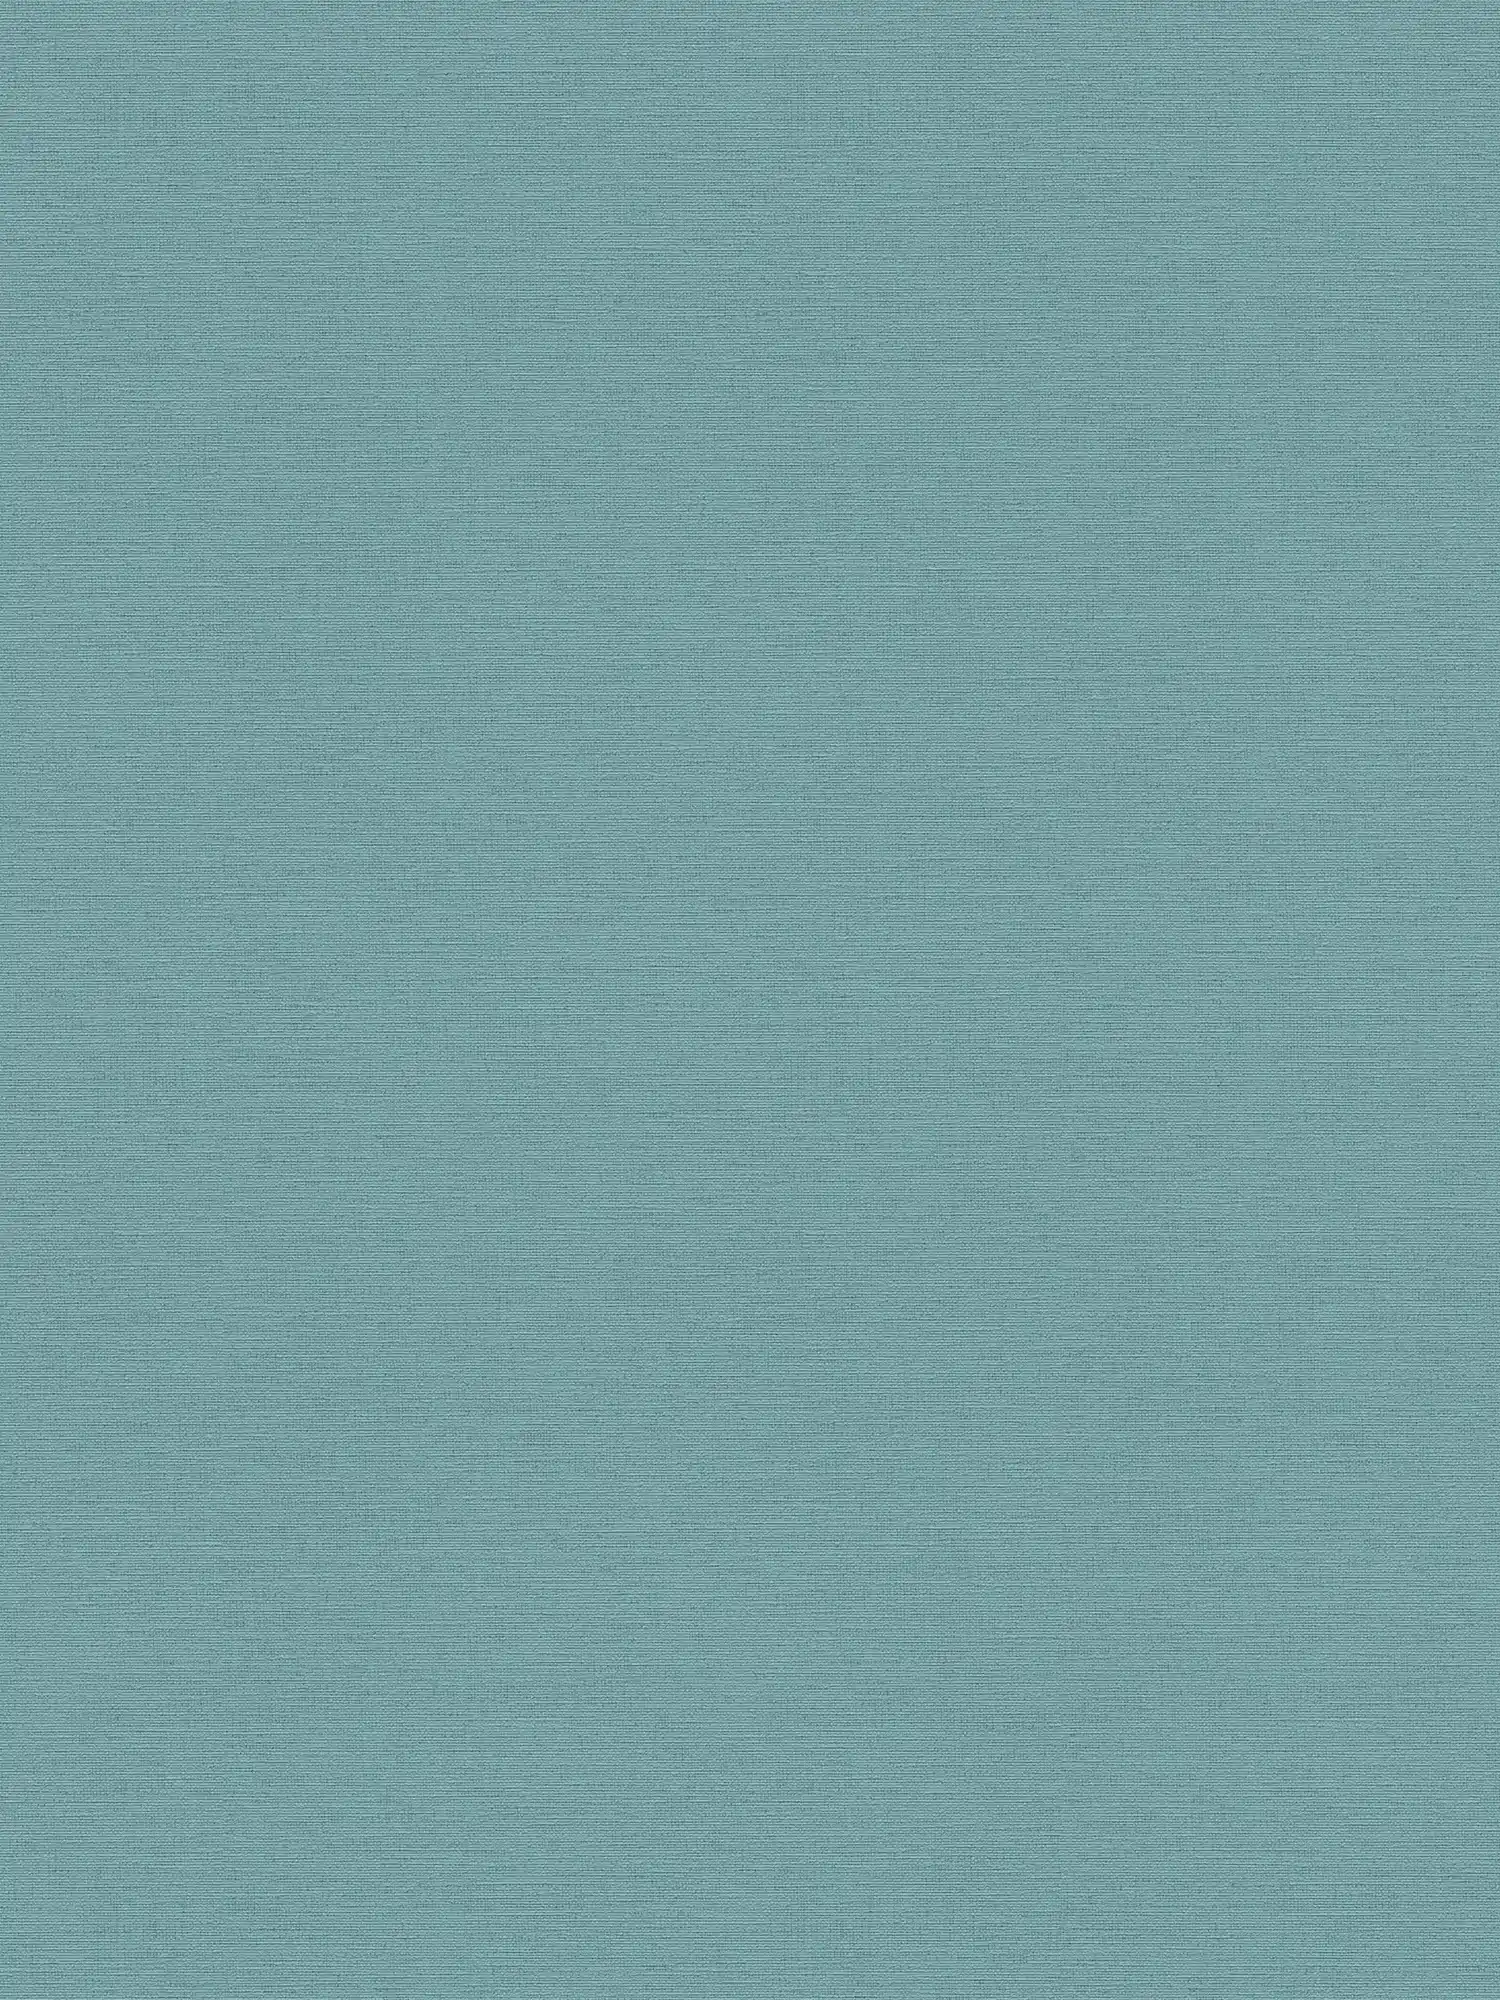 Turquoise green wallpaper plain with linen look & fabric texture
